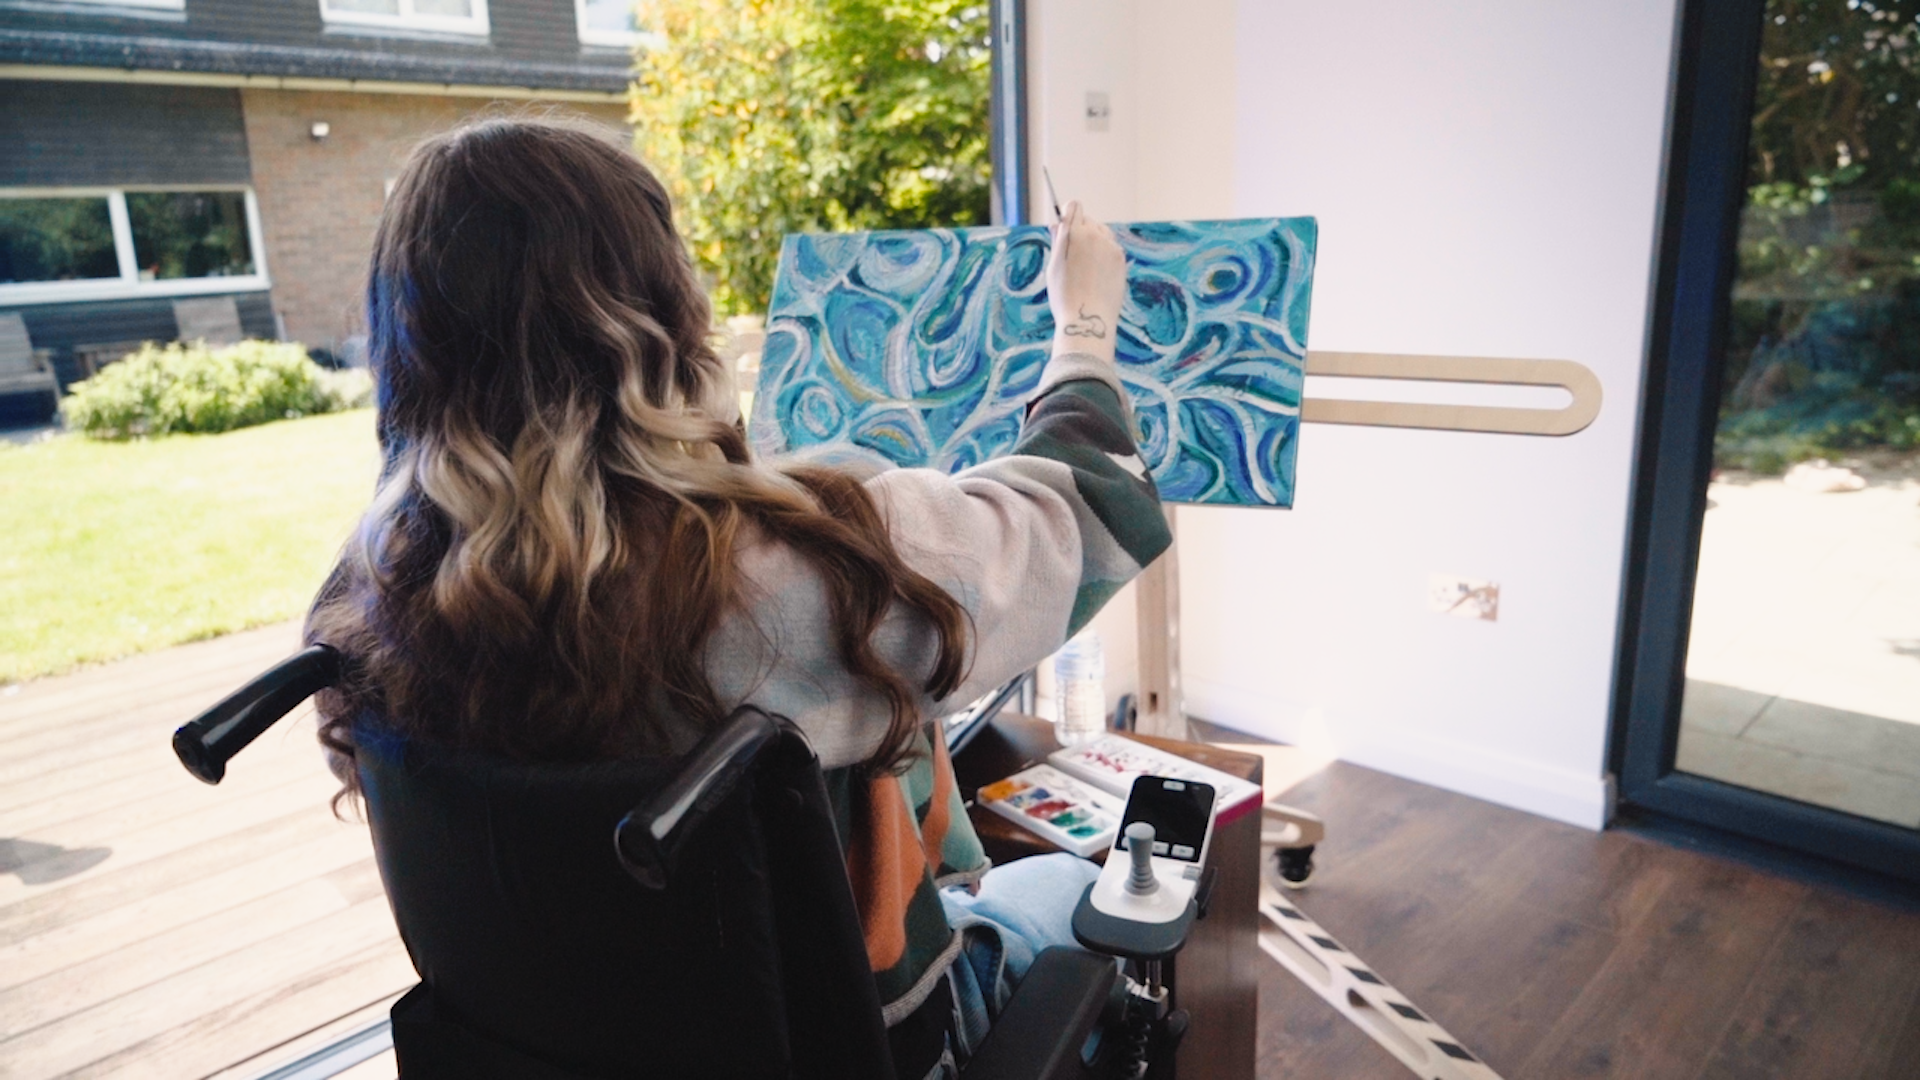 A person is seated in a wheelchair with push handles and a joystick. They face away from the camera while painting on a canvas with vabious shades of blue swirls which is mounted on a freasel. 